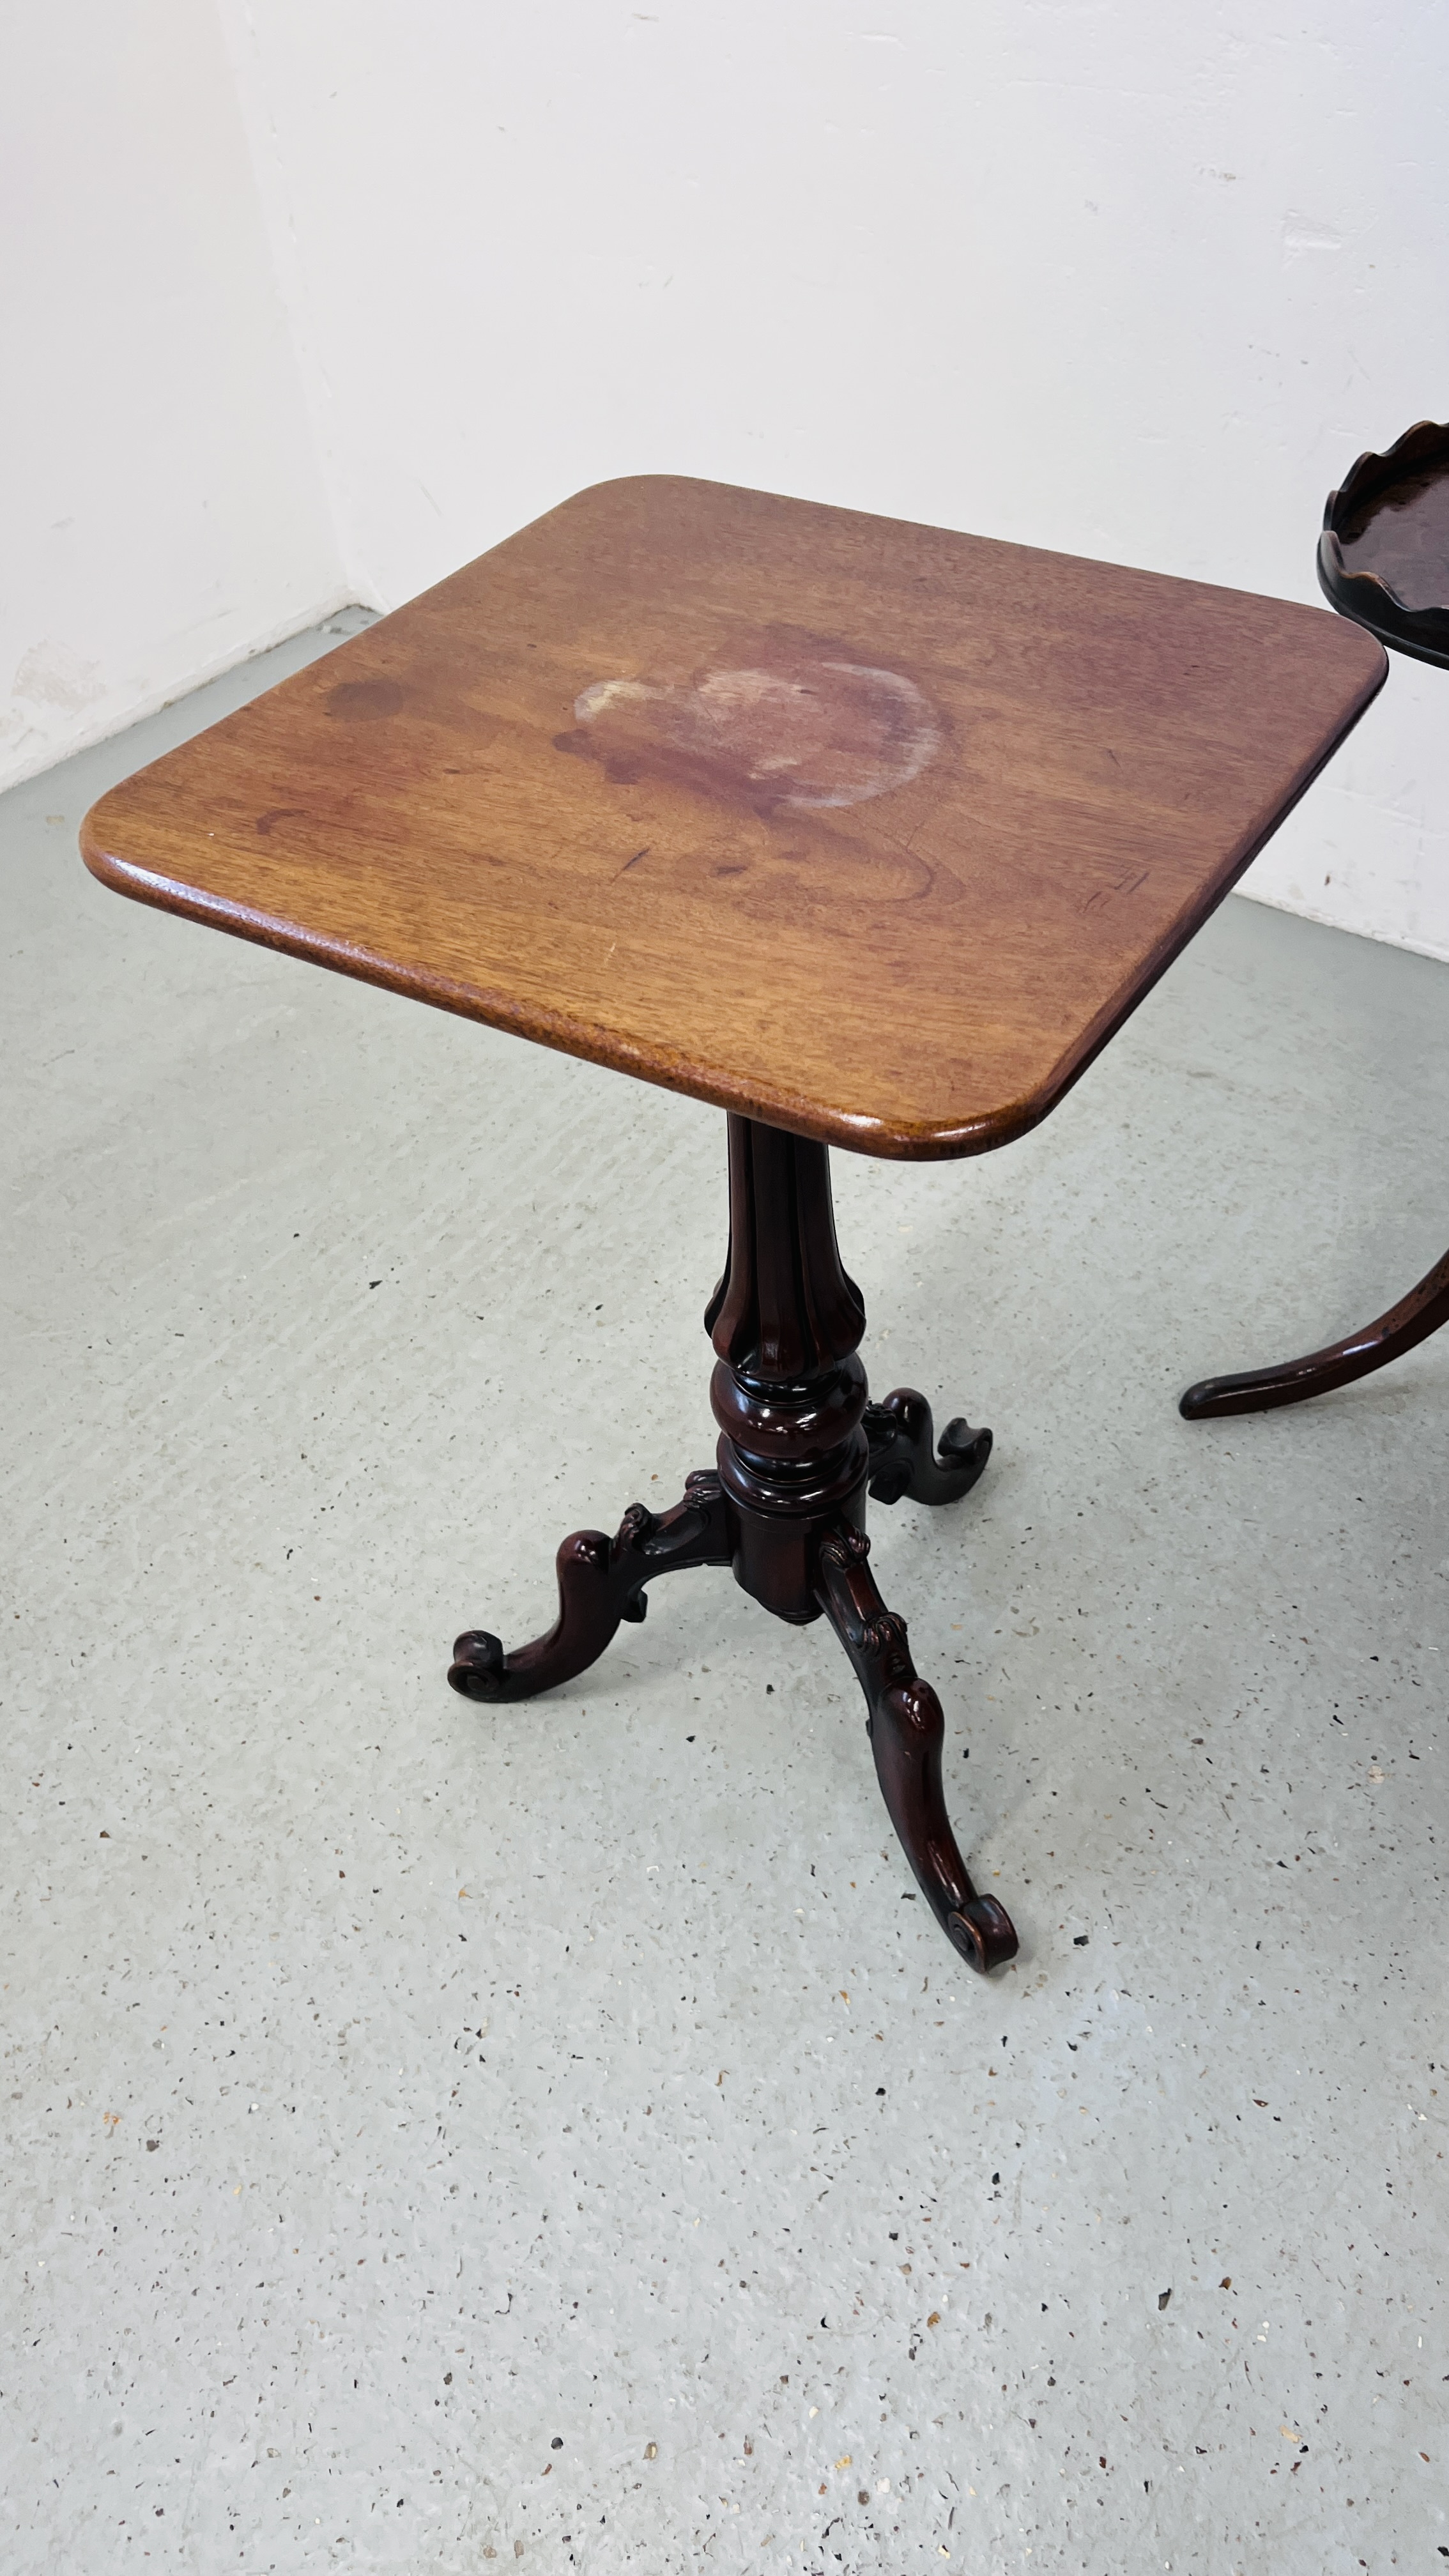 A VICTORIAN MAHOGANY TILT TOP PEDESTAL TABLE WITH SQUARE TOP 46CM. X 46CM. - Image 6 of 7